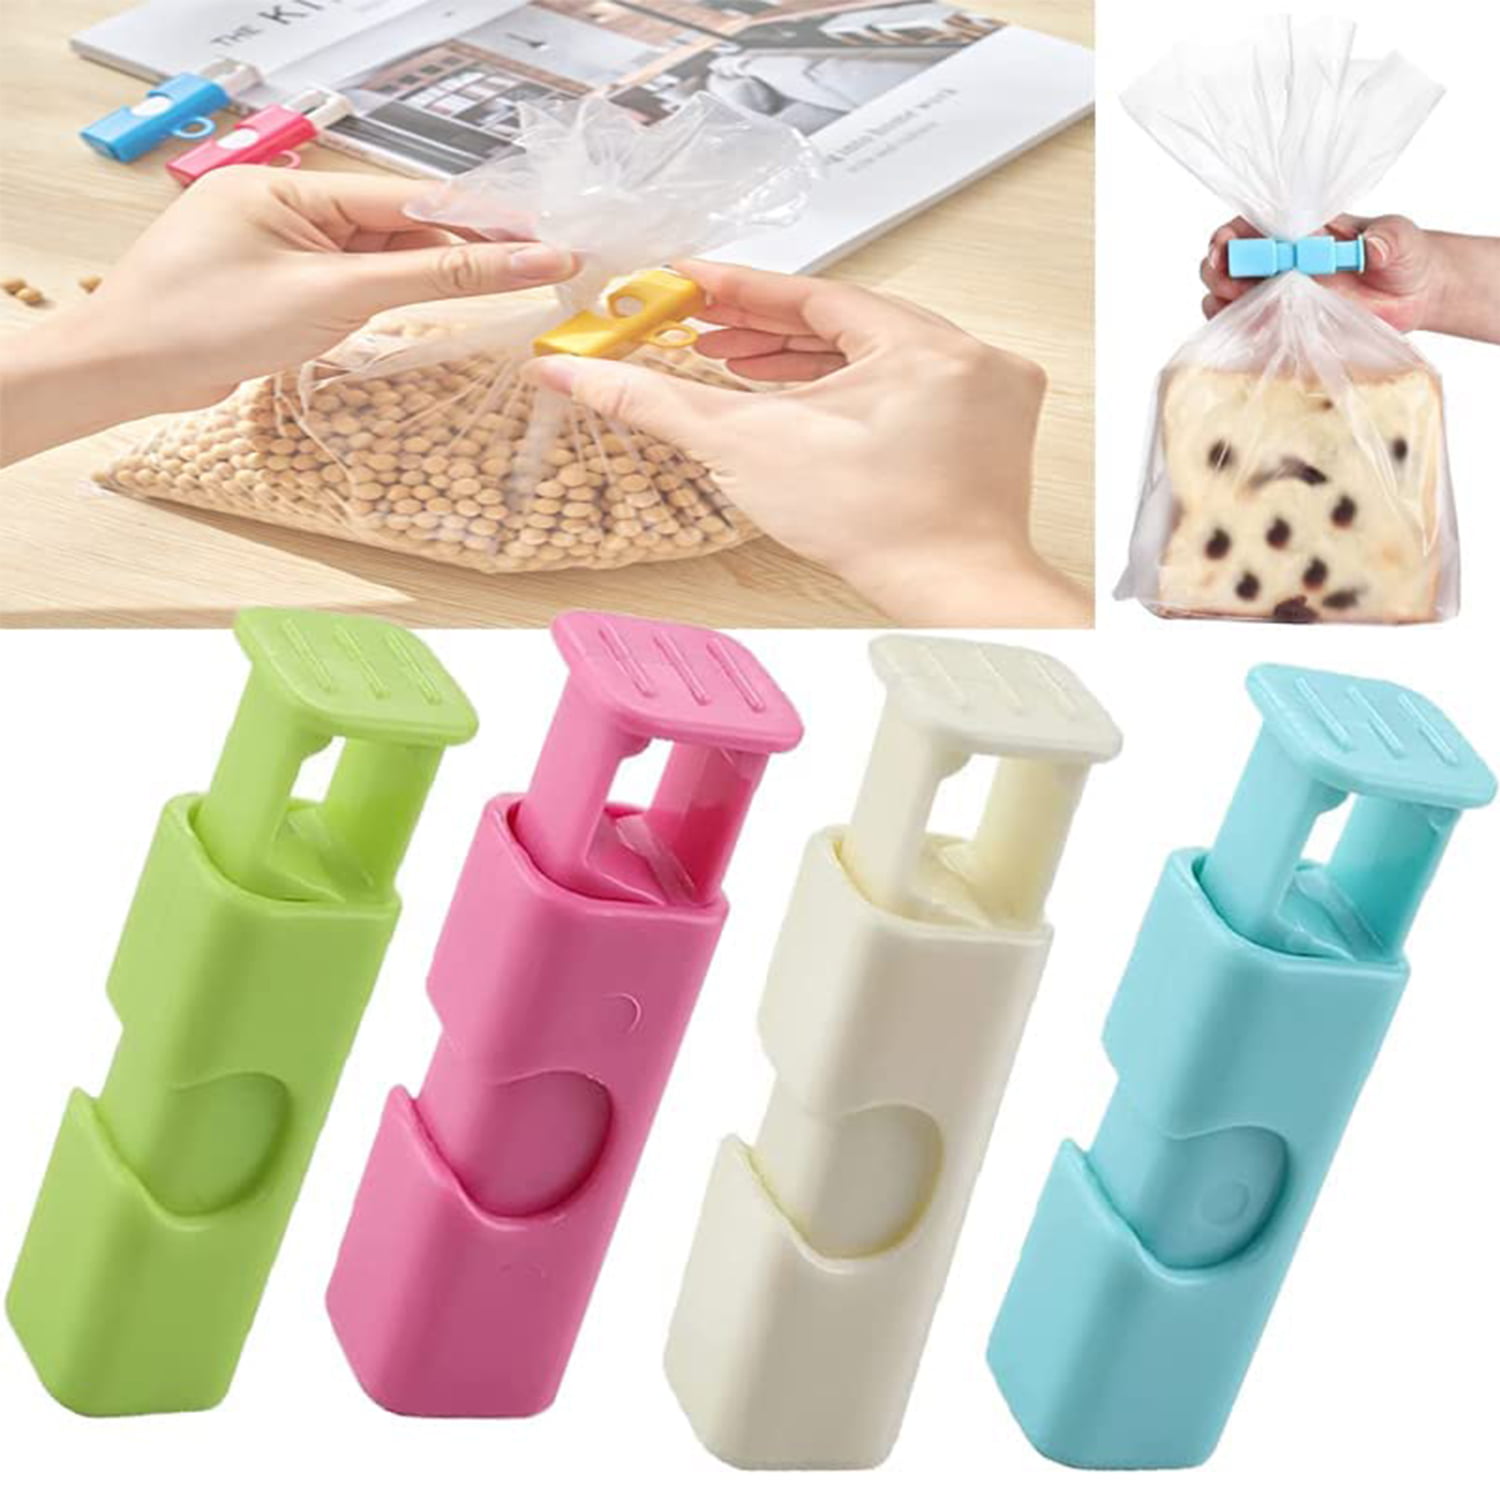 4Pcs Plastic Sealing Clips, Bag Clips,Bag Clips for Food and Snack Bags,  Bread Clips - Keep Food Fresh, Prevent Spillage - Microwave, Freezer and  Dishwasher-Safe - BPA-Free 